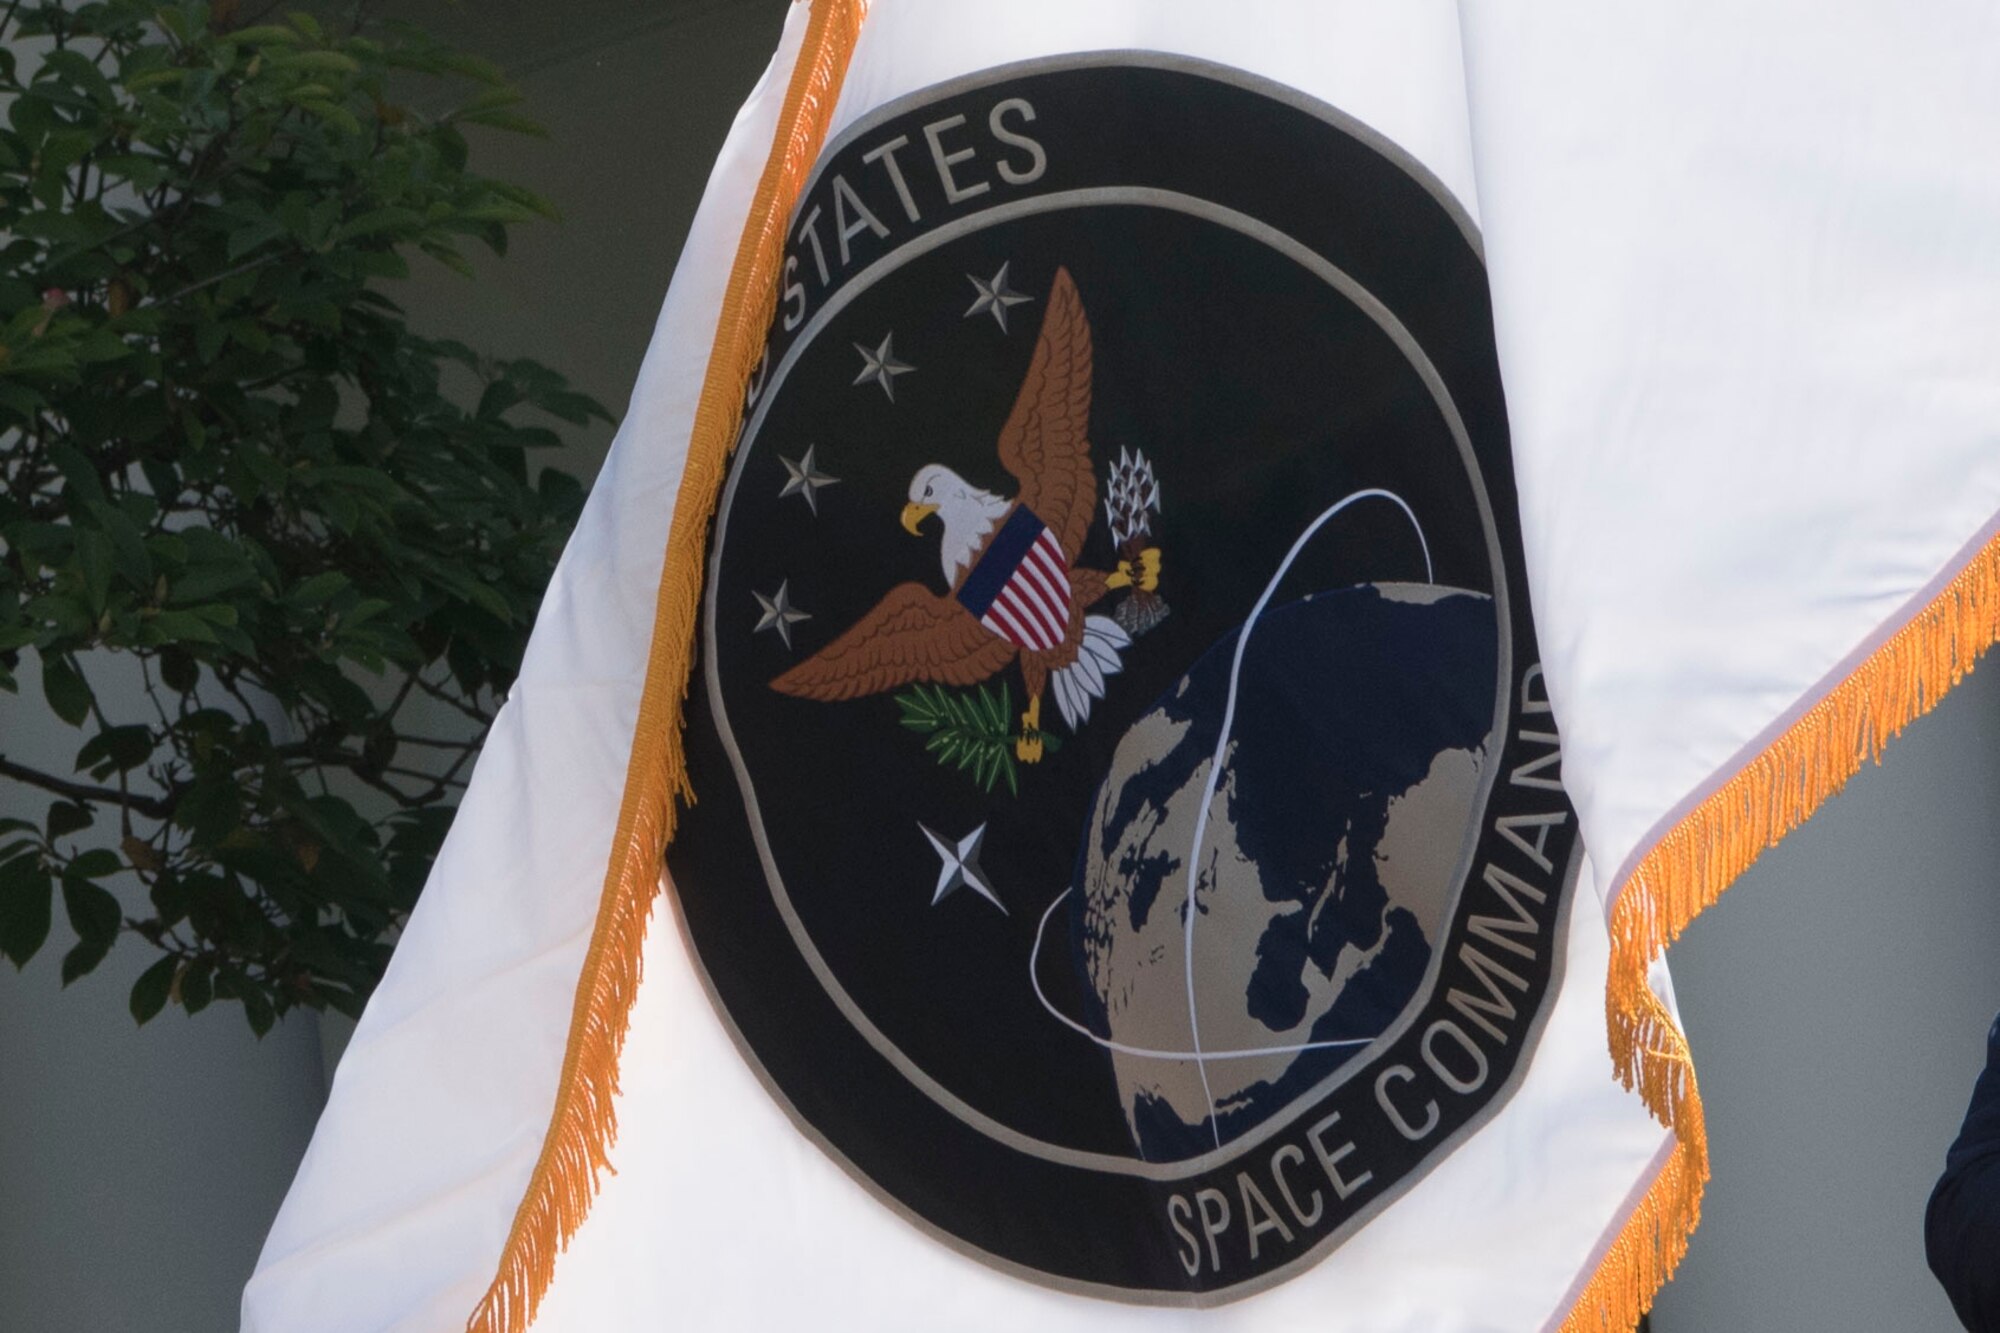 The flag of the U.S. Space Command is unfurled at the White House in a presentation with President Donald J. Trump, the incoming commander of U.S. Space Command, Air Force Gen. John W. Raymond, Vice President Mike Pence, Secretary of Defense Dr. Mark T. Esper, and Air Force Command Chief Master Sergeant Roger Towberman, Washington, D.C., Aug. 29, 2019.